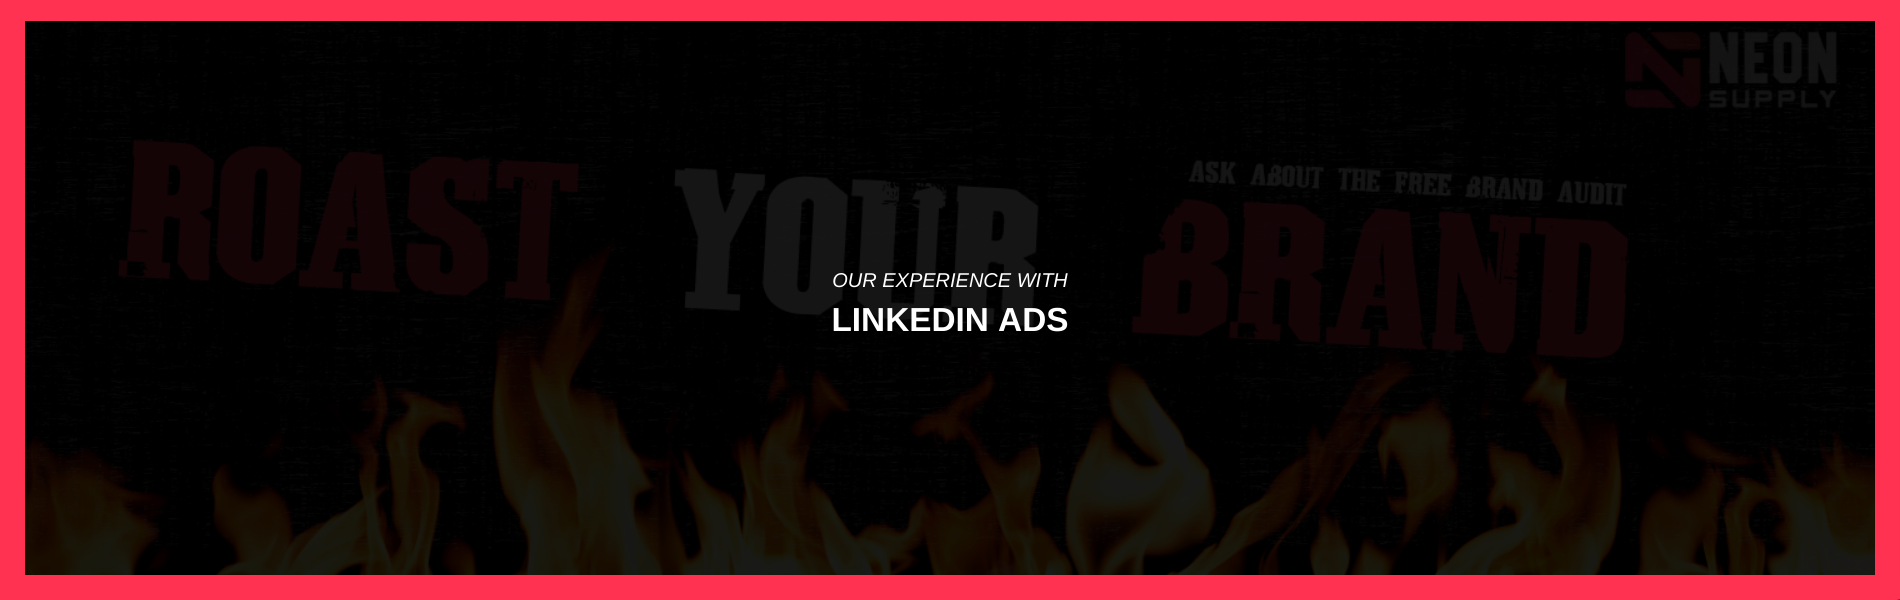 Our Experience with LinkedIn Ads